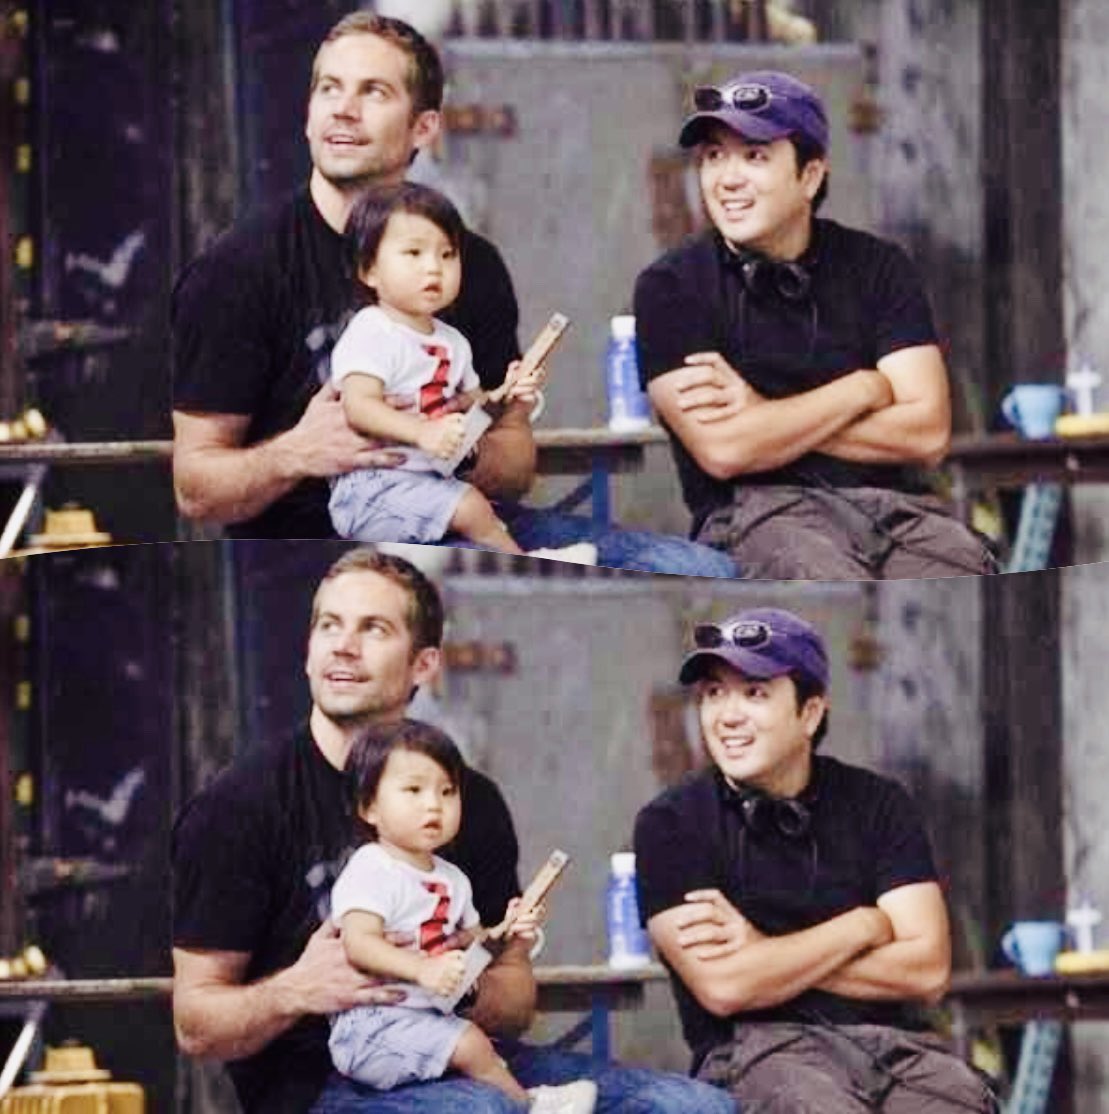 Behind-the-scenes of #FastandFurious! 💙 #FBF #TeamPW